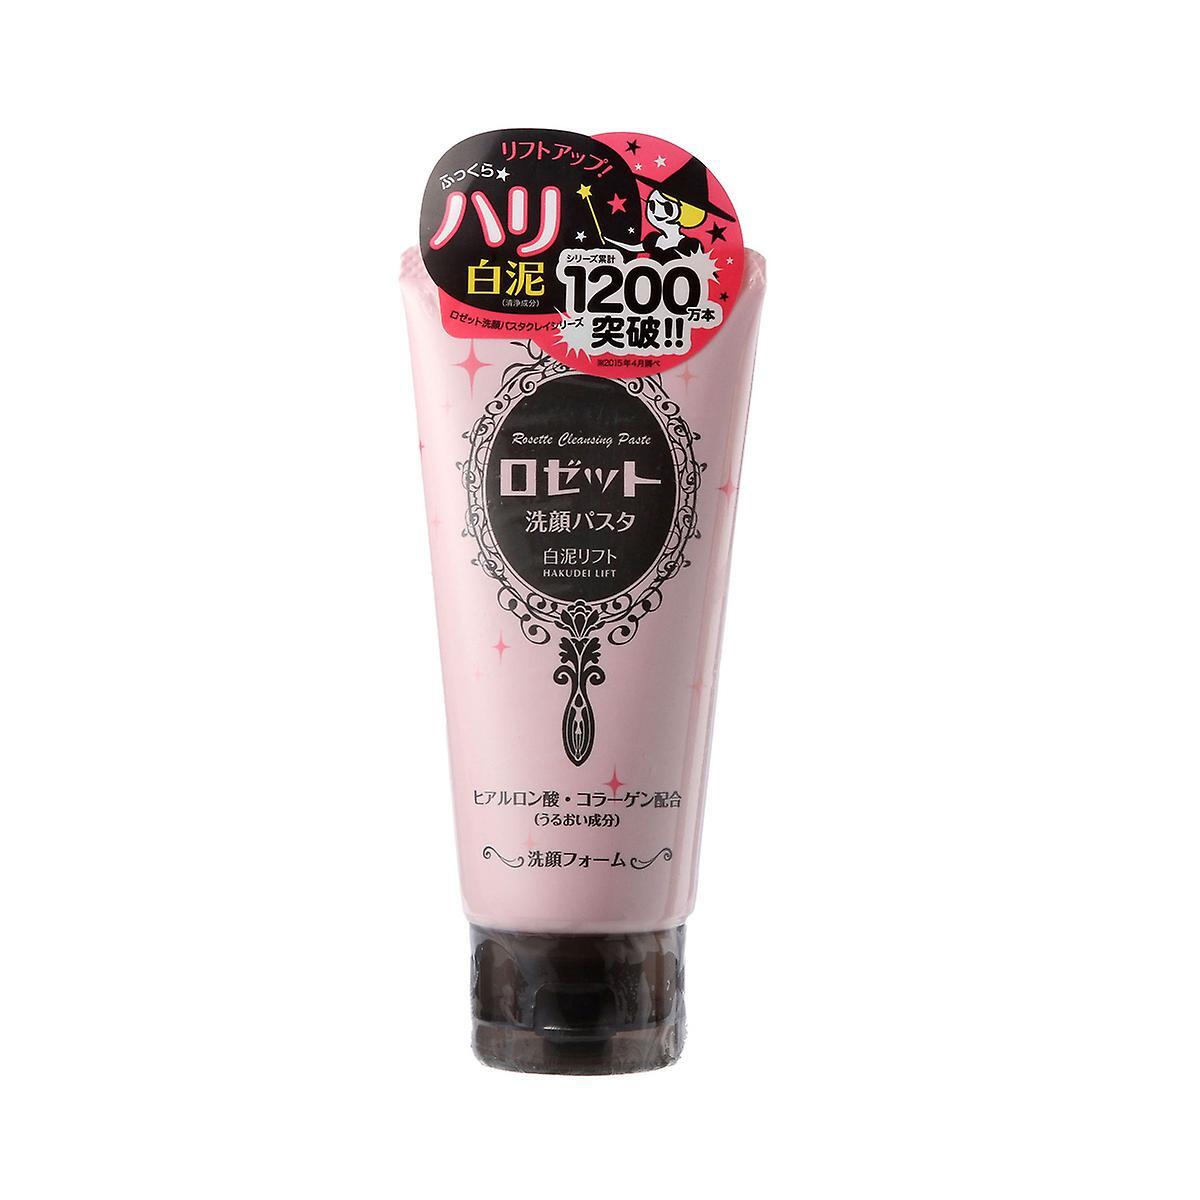 Rosette Cleansing Pasta Face Wash White Mud 120g - Pink